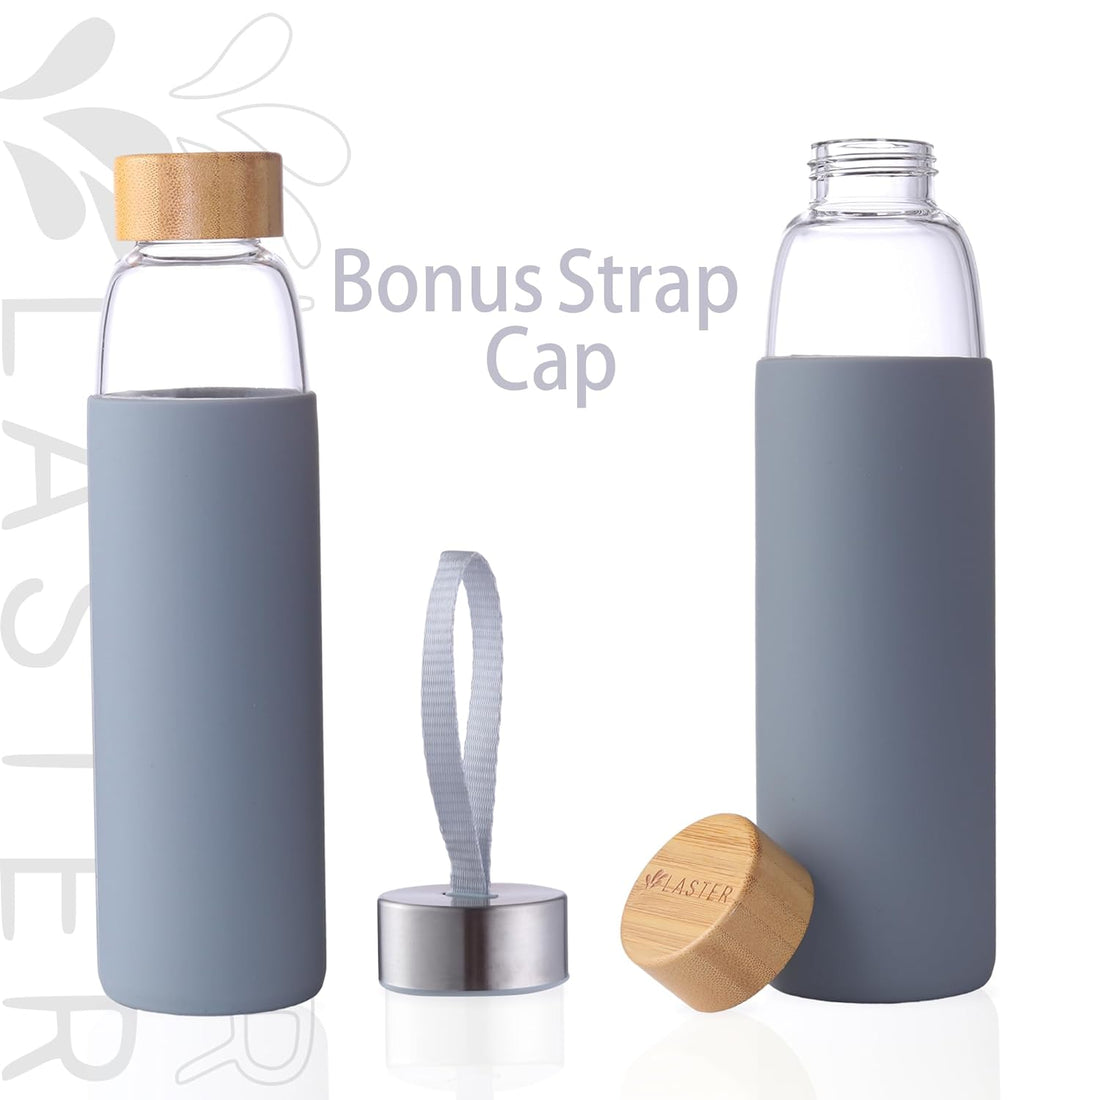 Laster Glass Water Bottle 20 Oz, 600 ml, made of Borosilicate Glass, 1 Bamboo & 1 Stainless Steel Lid, BPA Free, Non-Slip Silicone Sleeve (Grey)